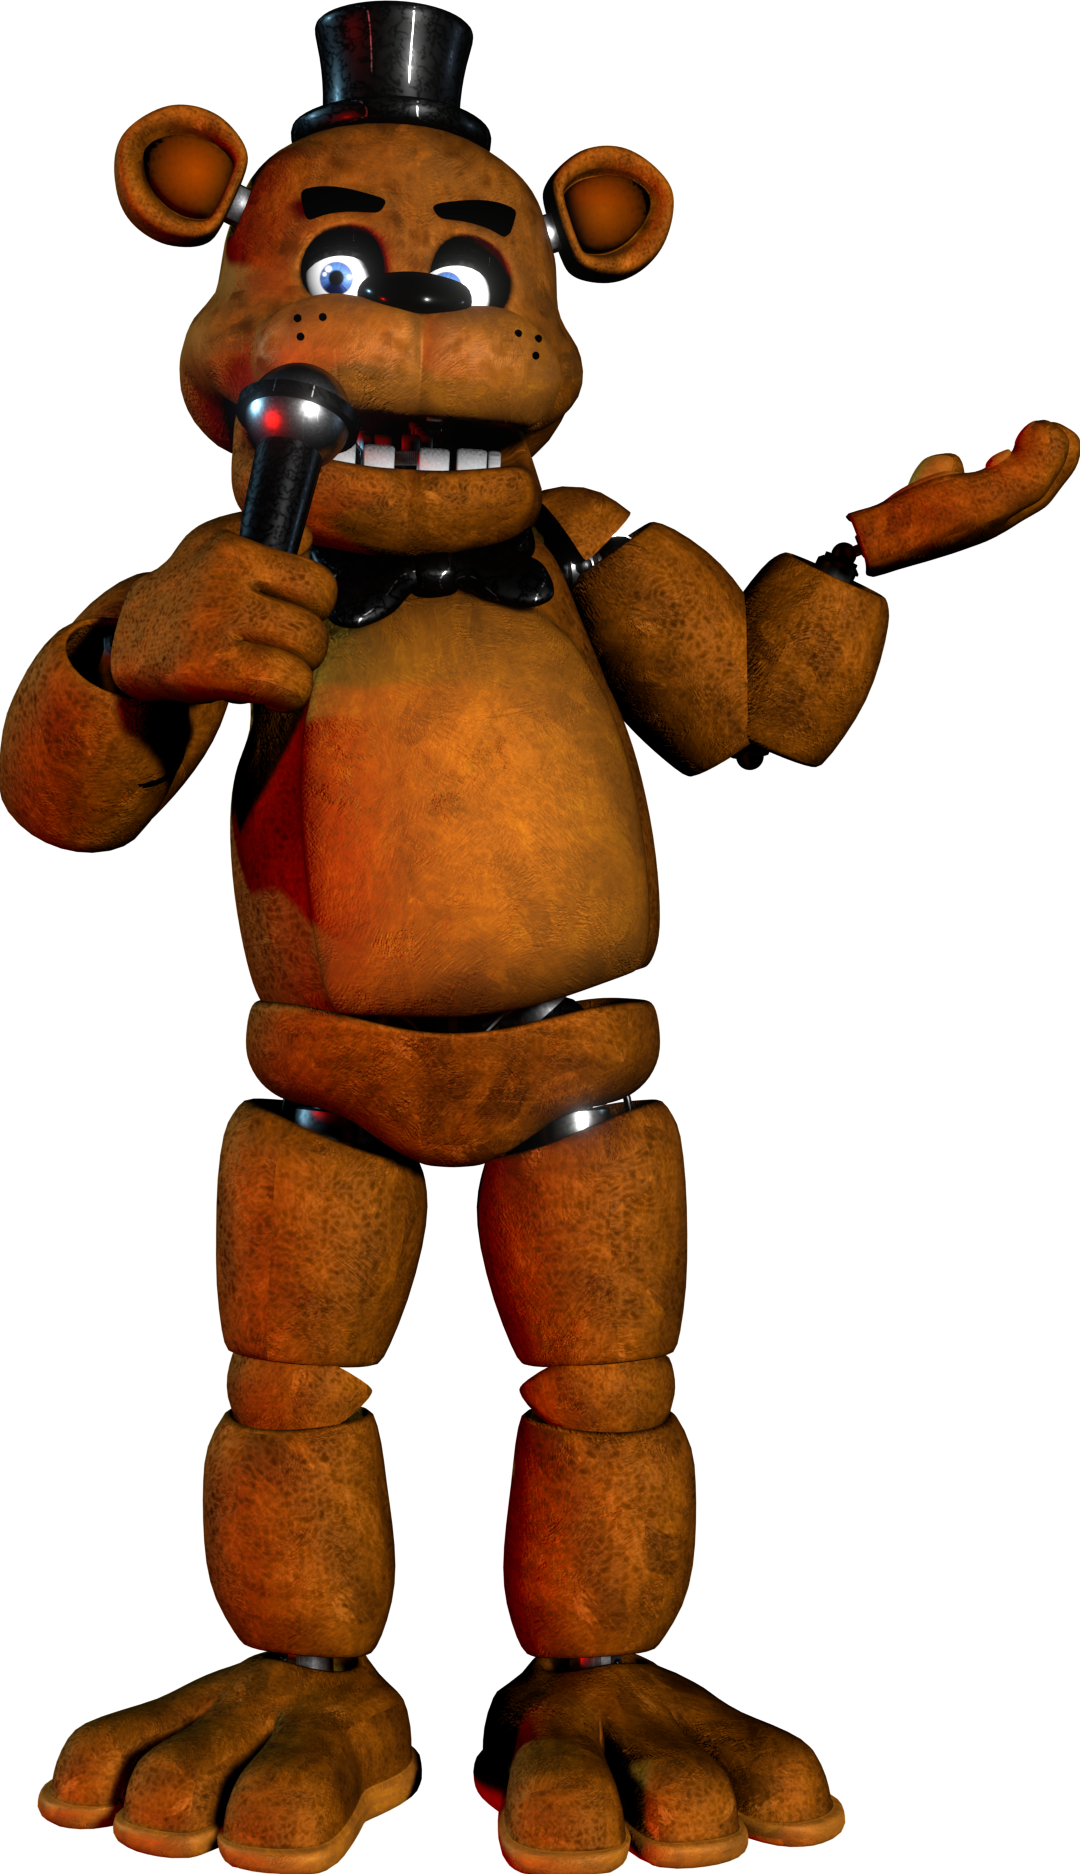 https://static.wikia.nocookie.net/the_xman_723/images/6/66/Freddy_Fazbear.png/revision/latest?cb=20221003031637